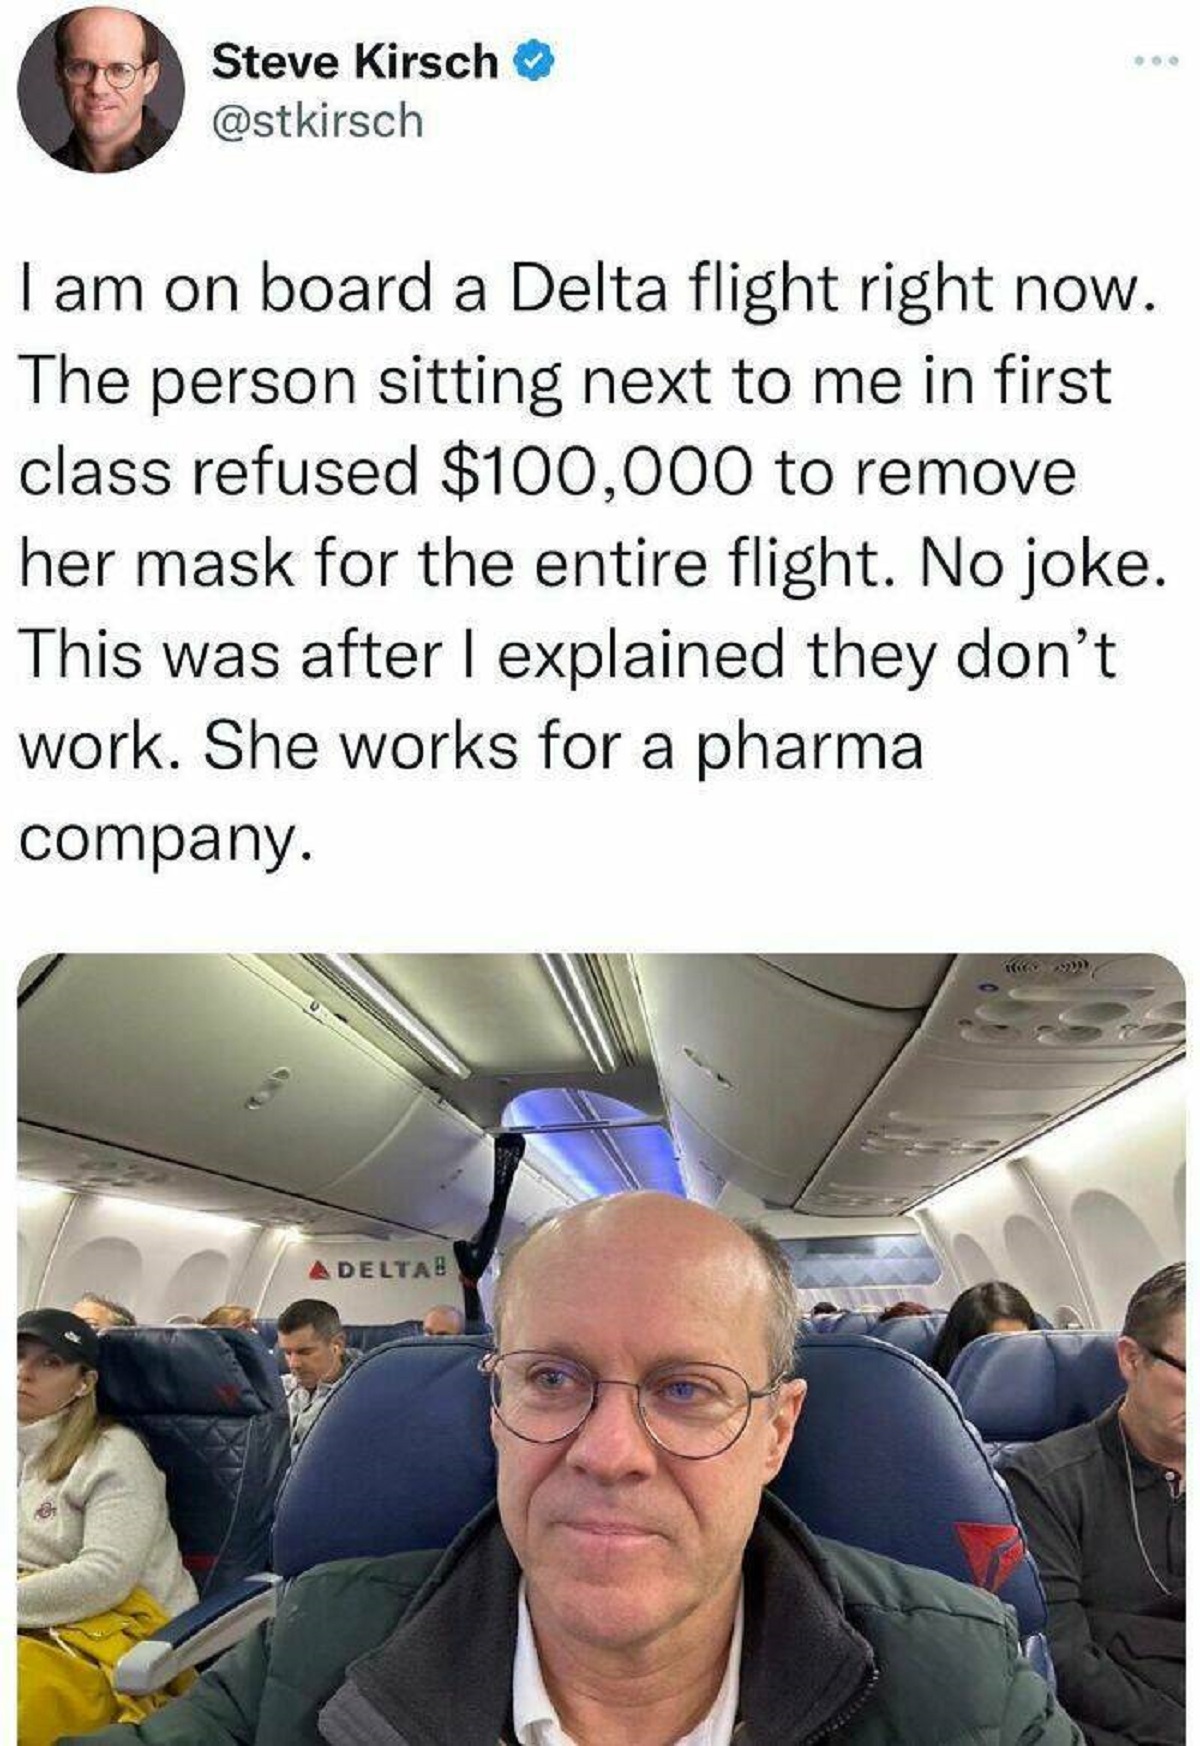 steve kirsch airplane - Steve Kirsch I am on board a Delta flight right now. The person sitting next to me in first class refused $100,000 to remove her mask for the entire flight. No joke. This was after I explained they don't work. She works for a pharm